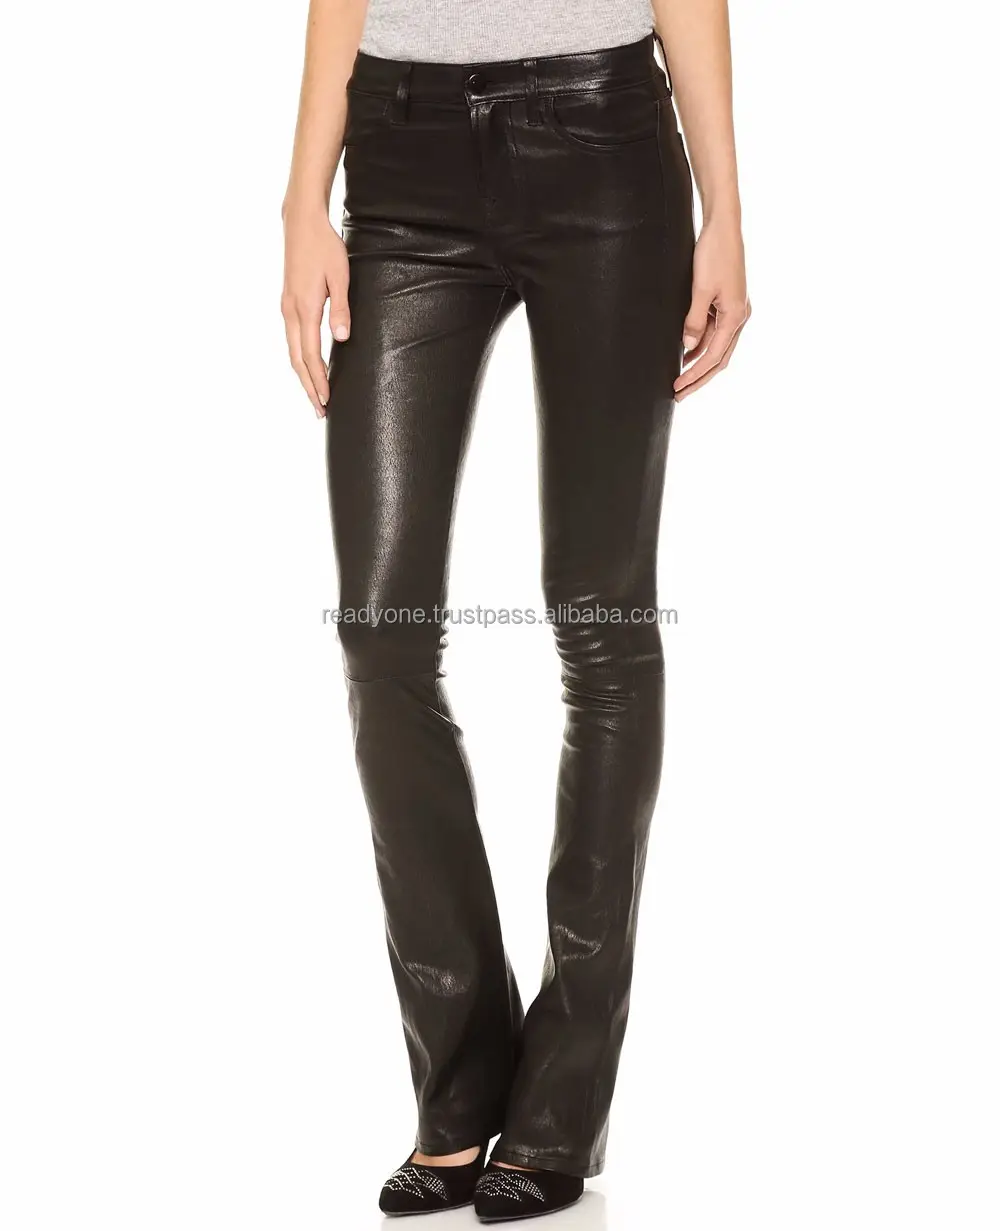 high quality skinny women leather pants in black color with elastic waist / Leather